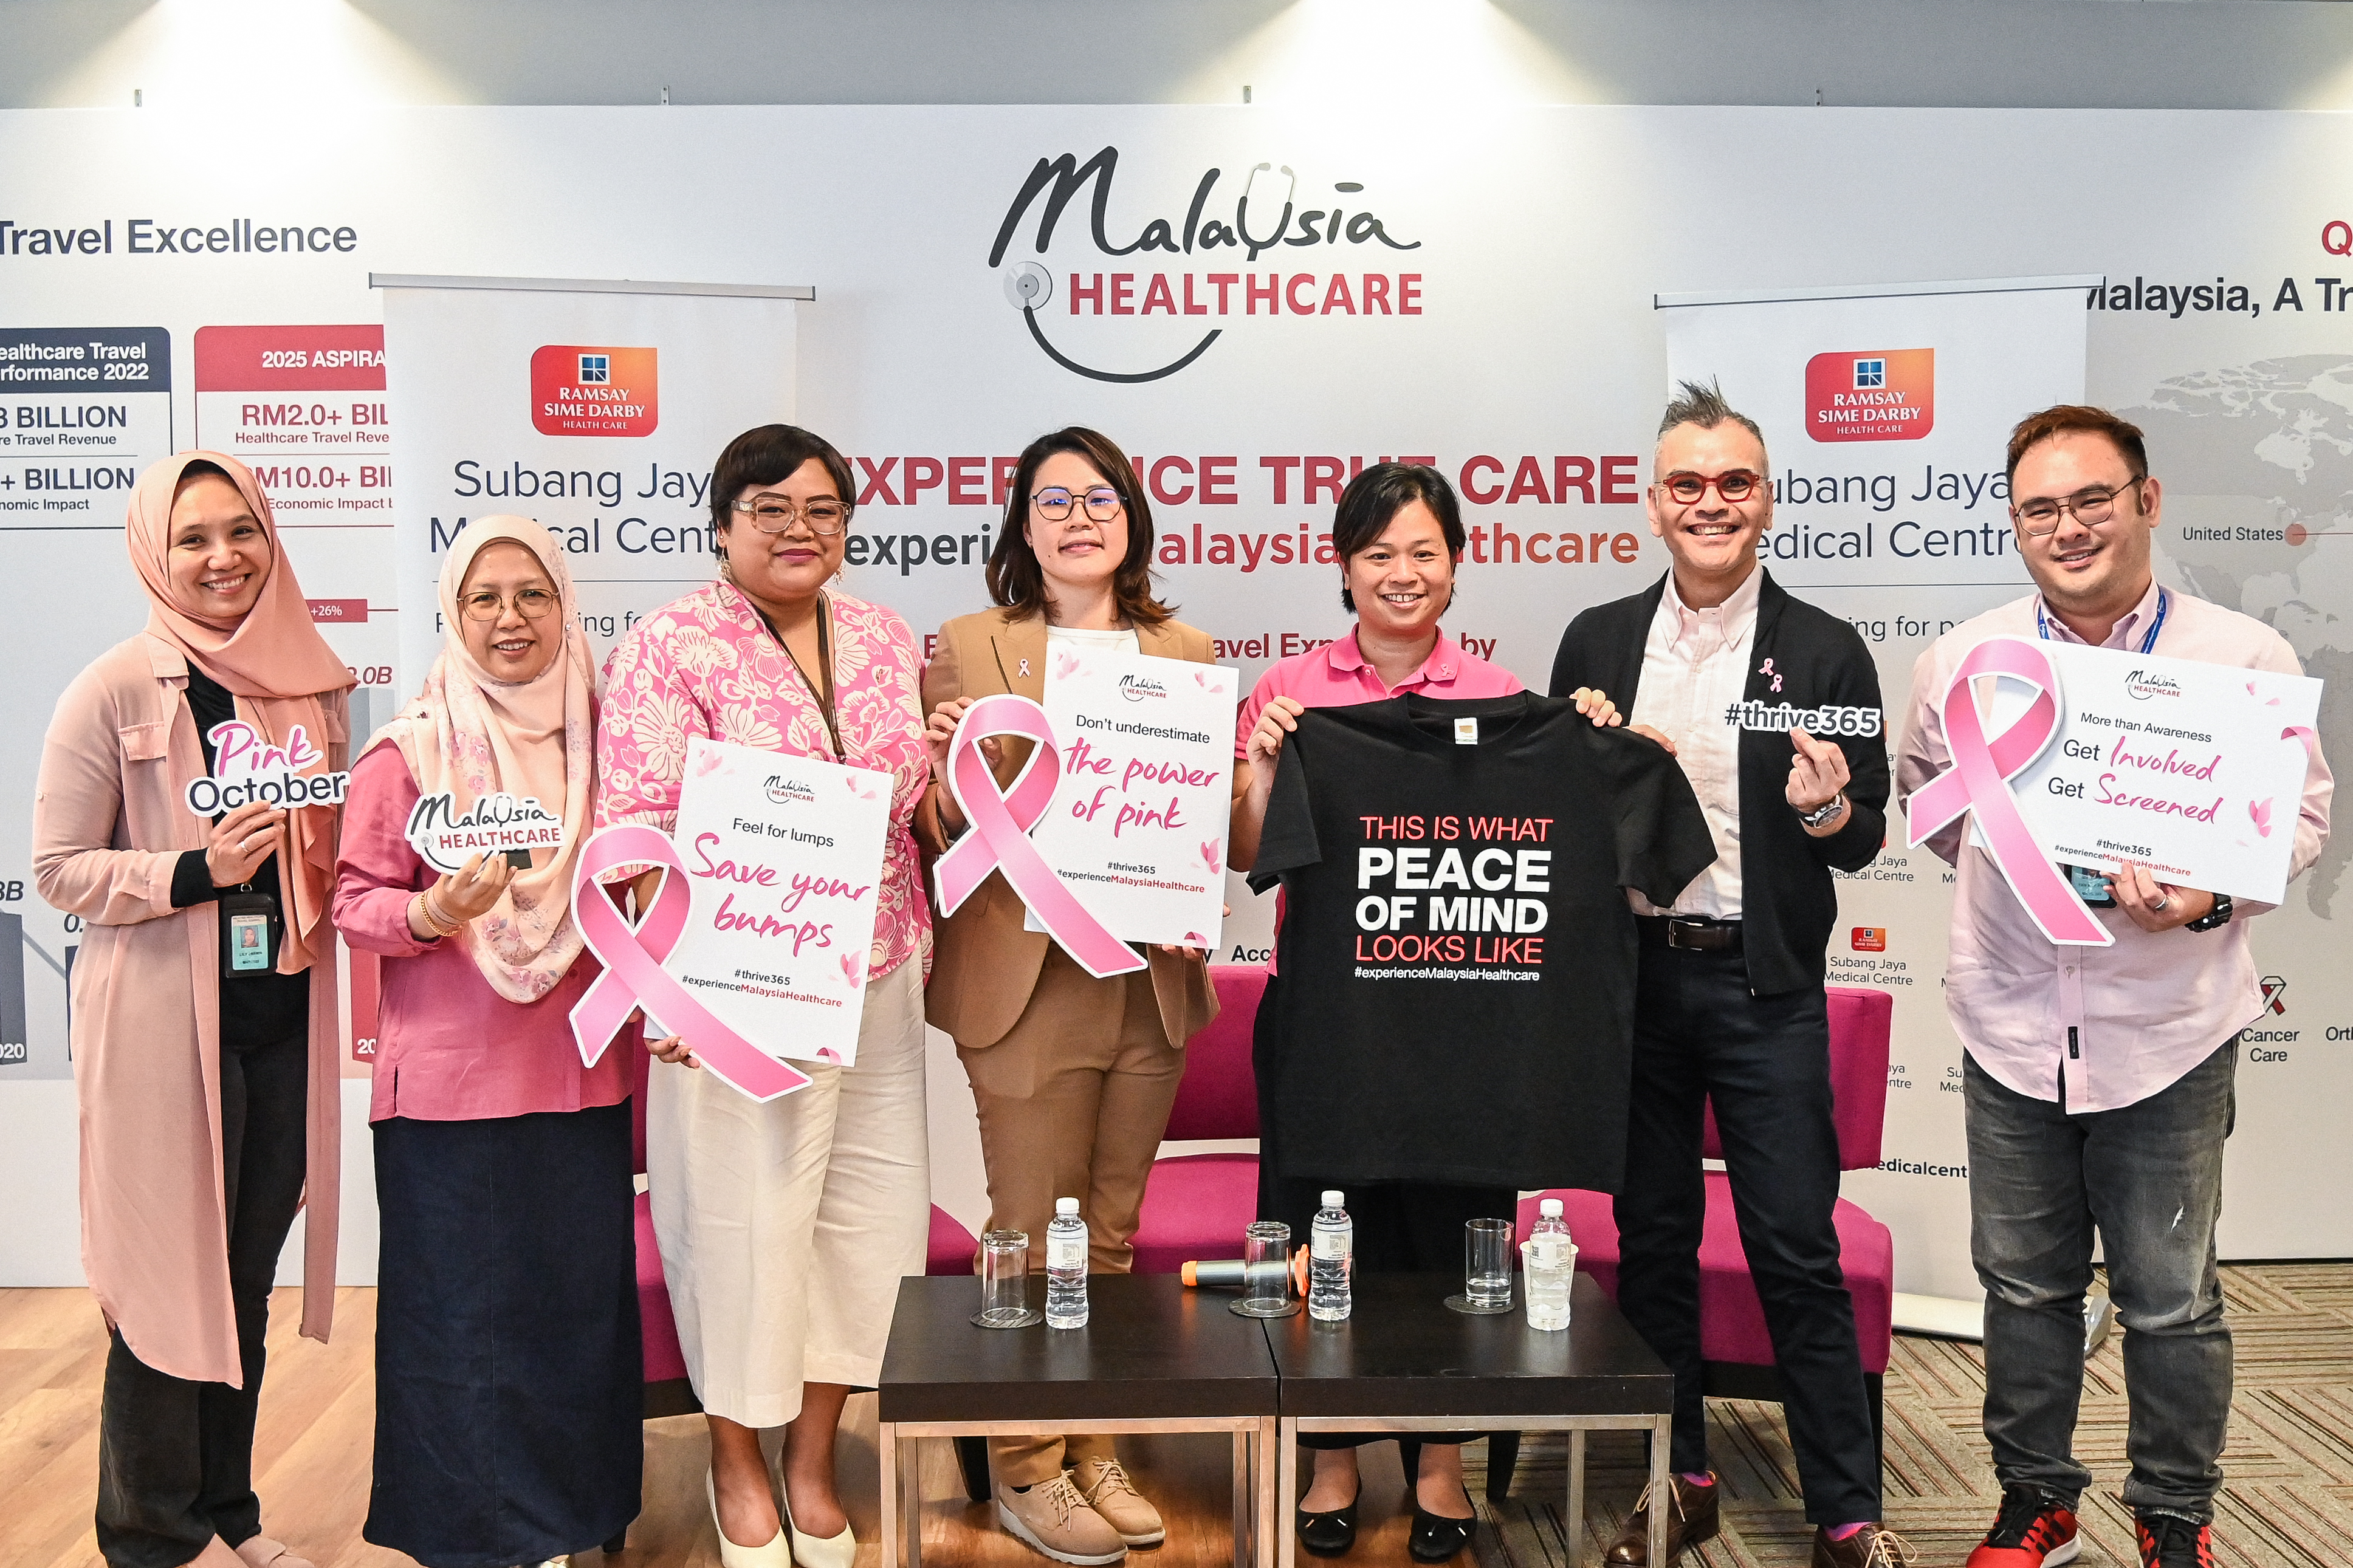 (From Left) Ms. Lily Jasmin, Vice President of Corporate Strategy; Ms. Norhaslina Mamat, Vice president of Facilitation; Ms. Tutie Ismail, Vice President of Communications at MHTC; Dr. Teh Mei Sze, Consultant Breast Surgeon (Oncoplastic) Subang Jaya Medical Centre (SJMC); Ms. Yoon Sook Yee, Certified Genetic Counsellor Subang Jaya Medical Centre (SJMC); Mr. Farizal Jaafar, Acting Chief Executive Officer of MHTC; Tan Kay Pau, Vice President of Business Stability at MHTC Breast Cancer Awareness Day “Thrive 365”